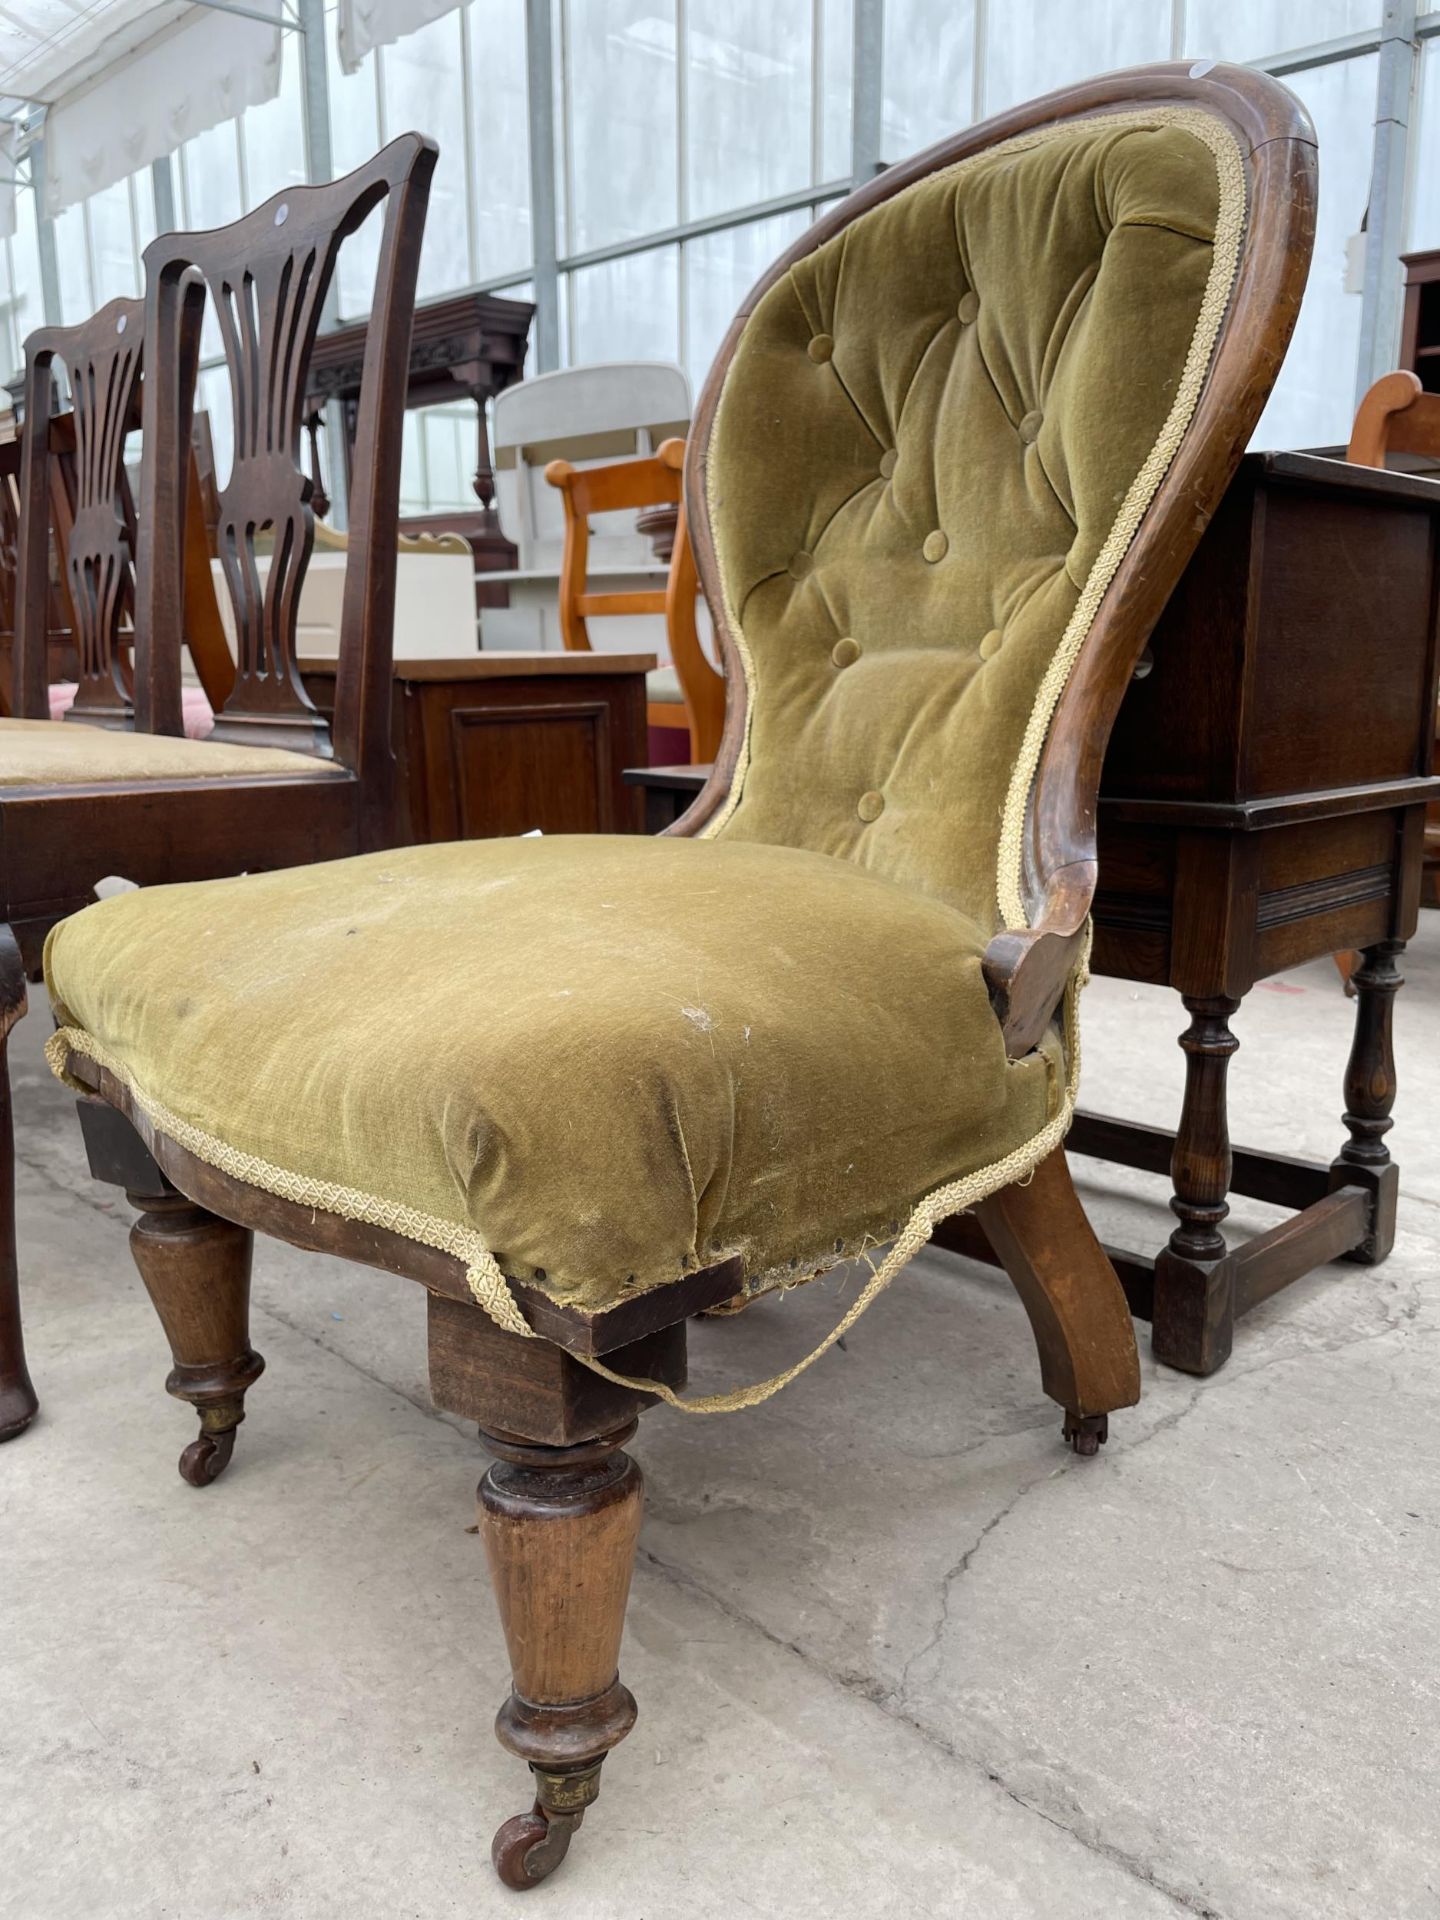 A VICTORIAN STYLE SPOON BACK CHAIR (FRONT LEGS NOT ATTACHED) - Image 2 of 2